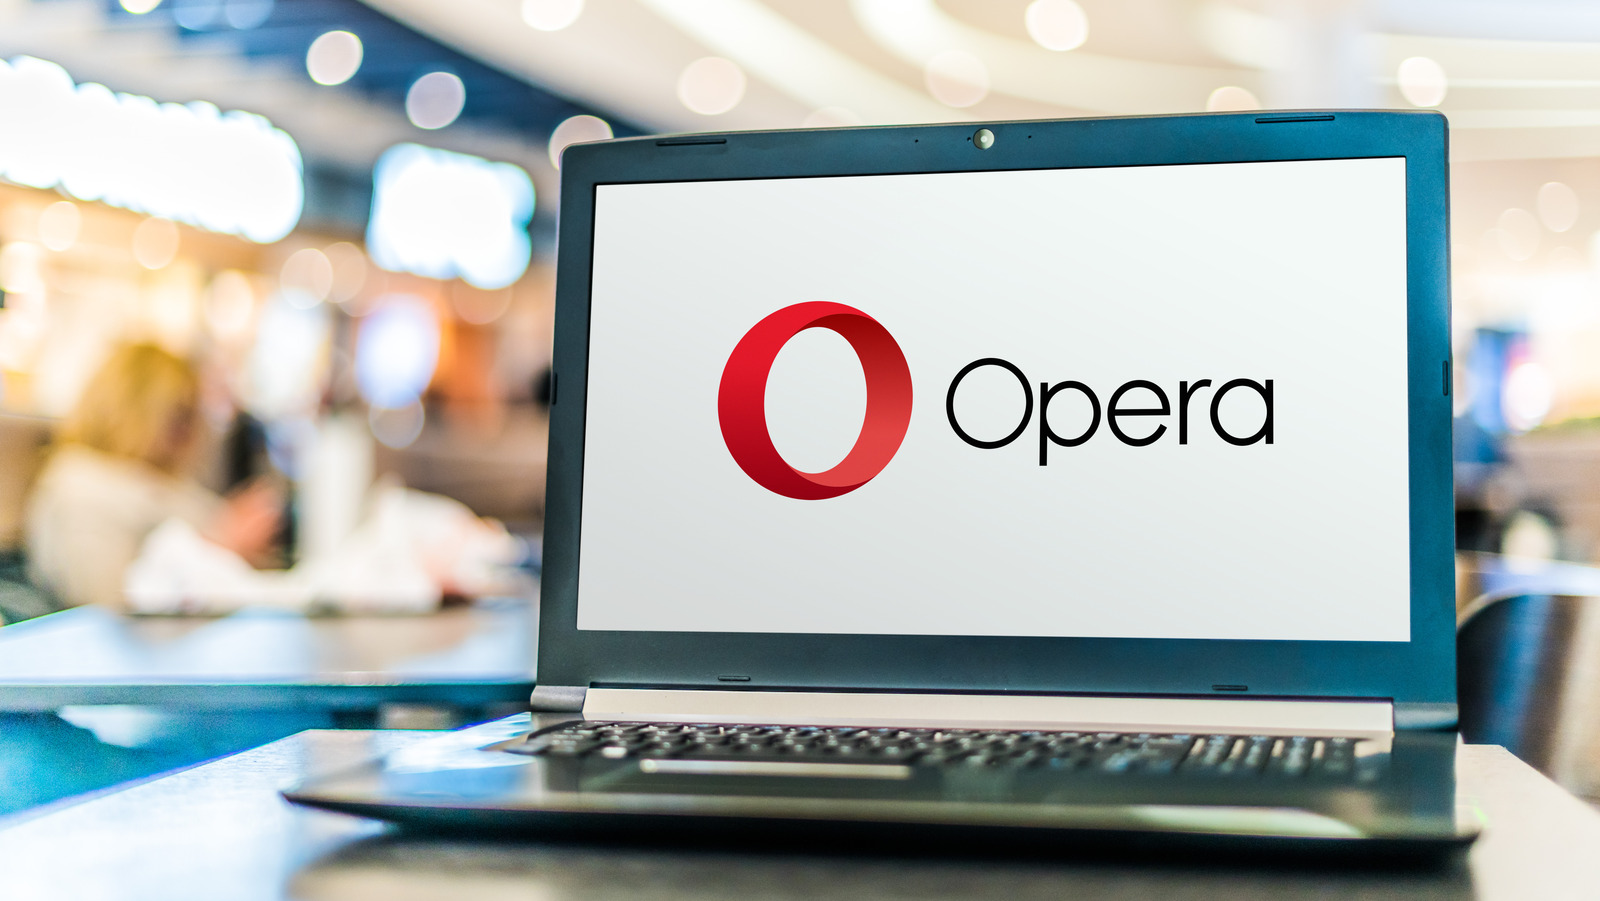 Opera GX launches GX Profiles and Video Pickup to enhance your